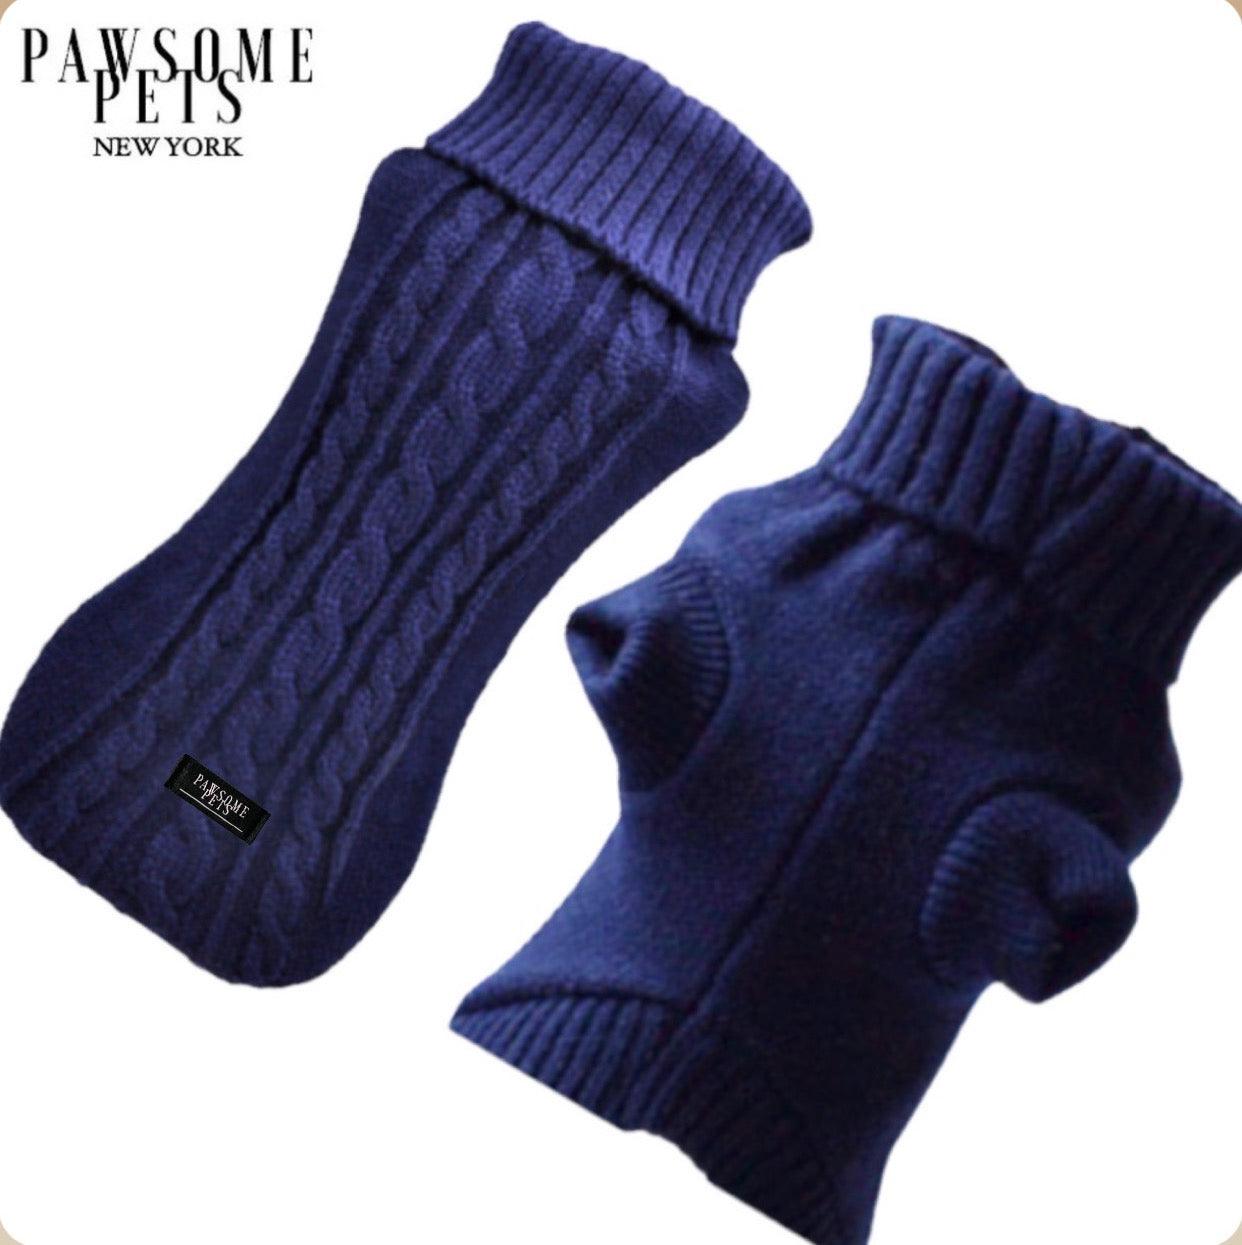 (EXTRA WARM) DOG AND CAT CABLE KNIT SWEATER - NAVY BLUE - Pawsomepetsnewyork